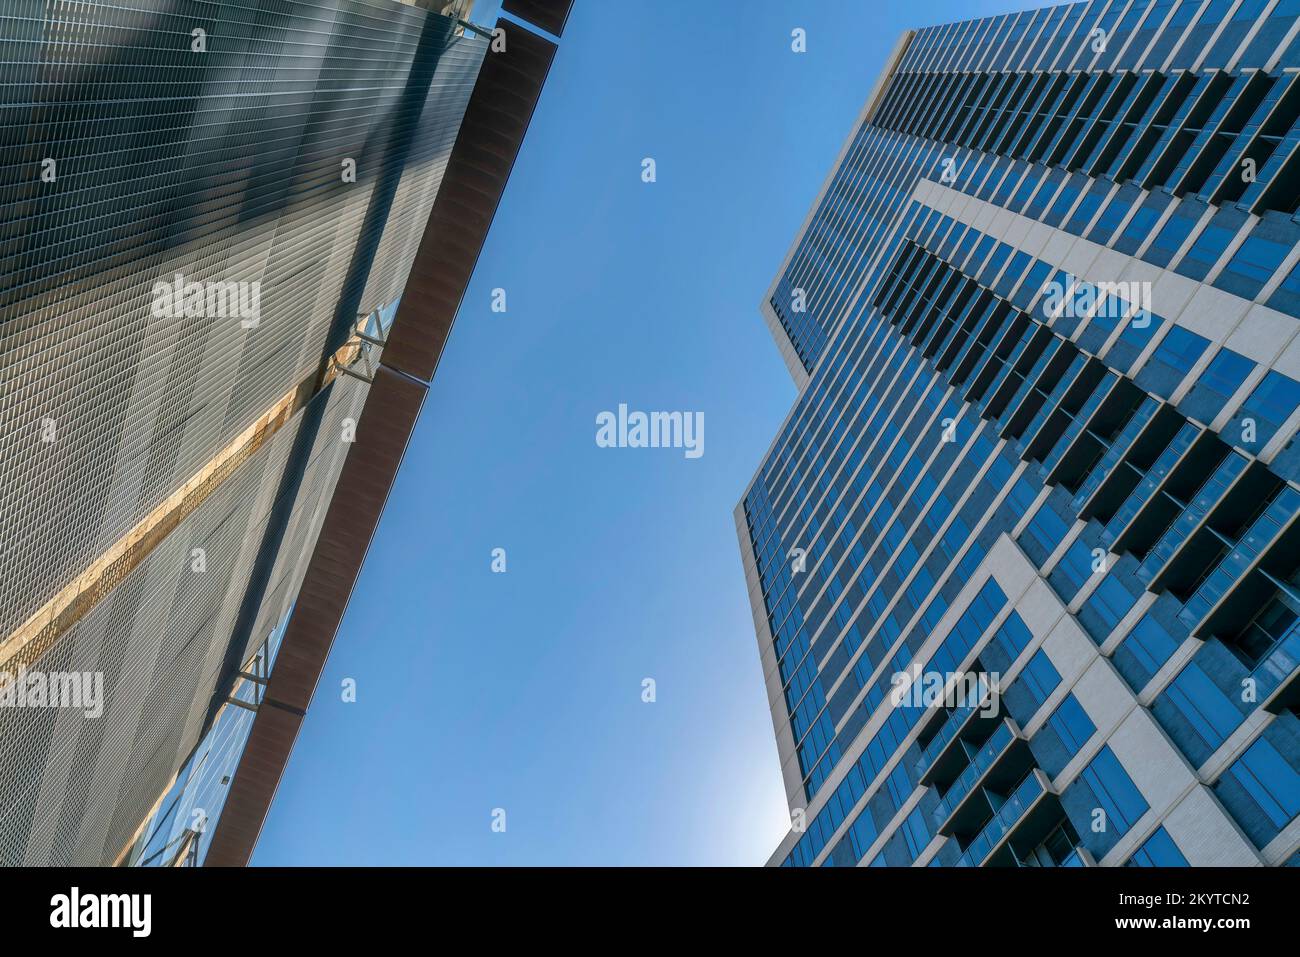 Austin, Texas- Two buildings across each other in a low angle view. There is a building on the left with metal wall across the building on the right w Stock Photo